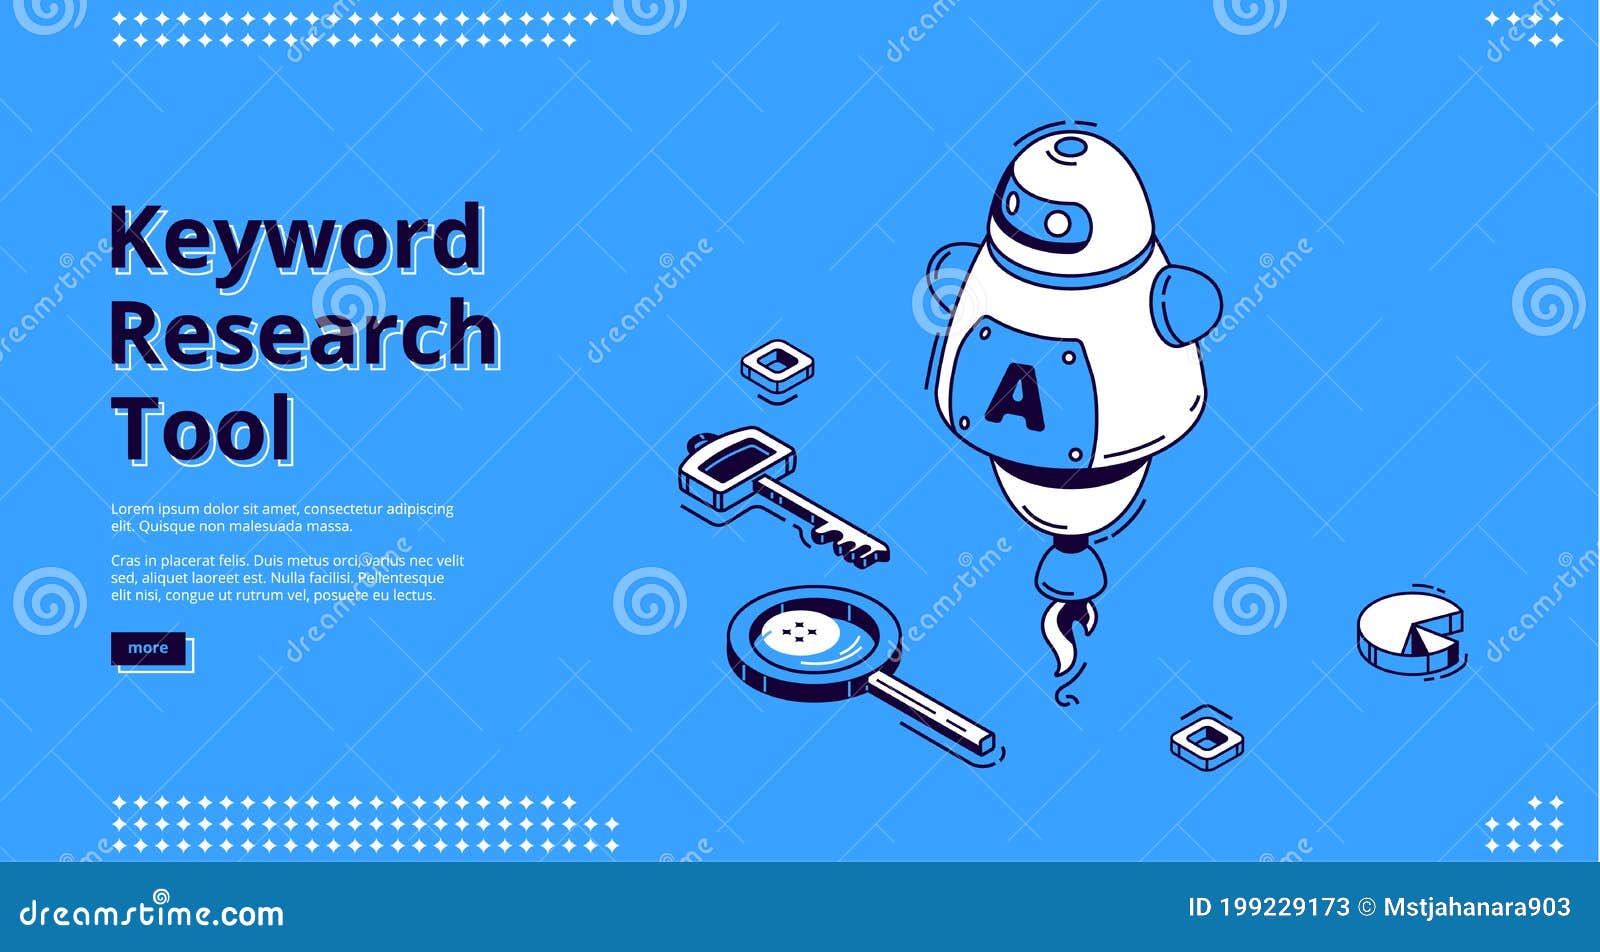 Keyword Research Tool Banner With Isometric Icons Stock Vector Illustration Of Line Marketing